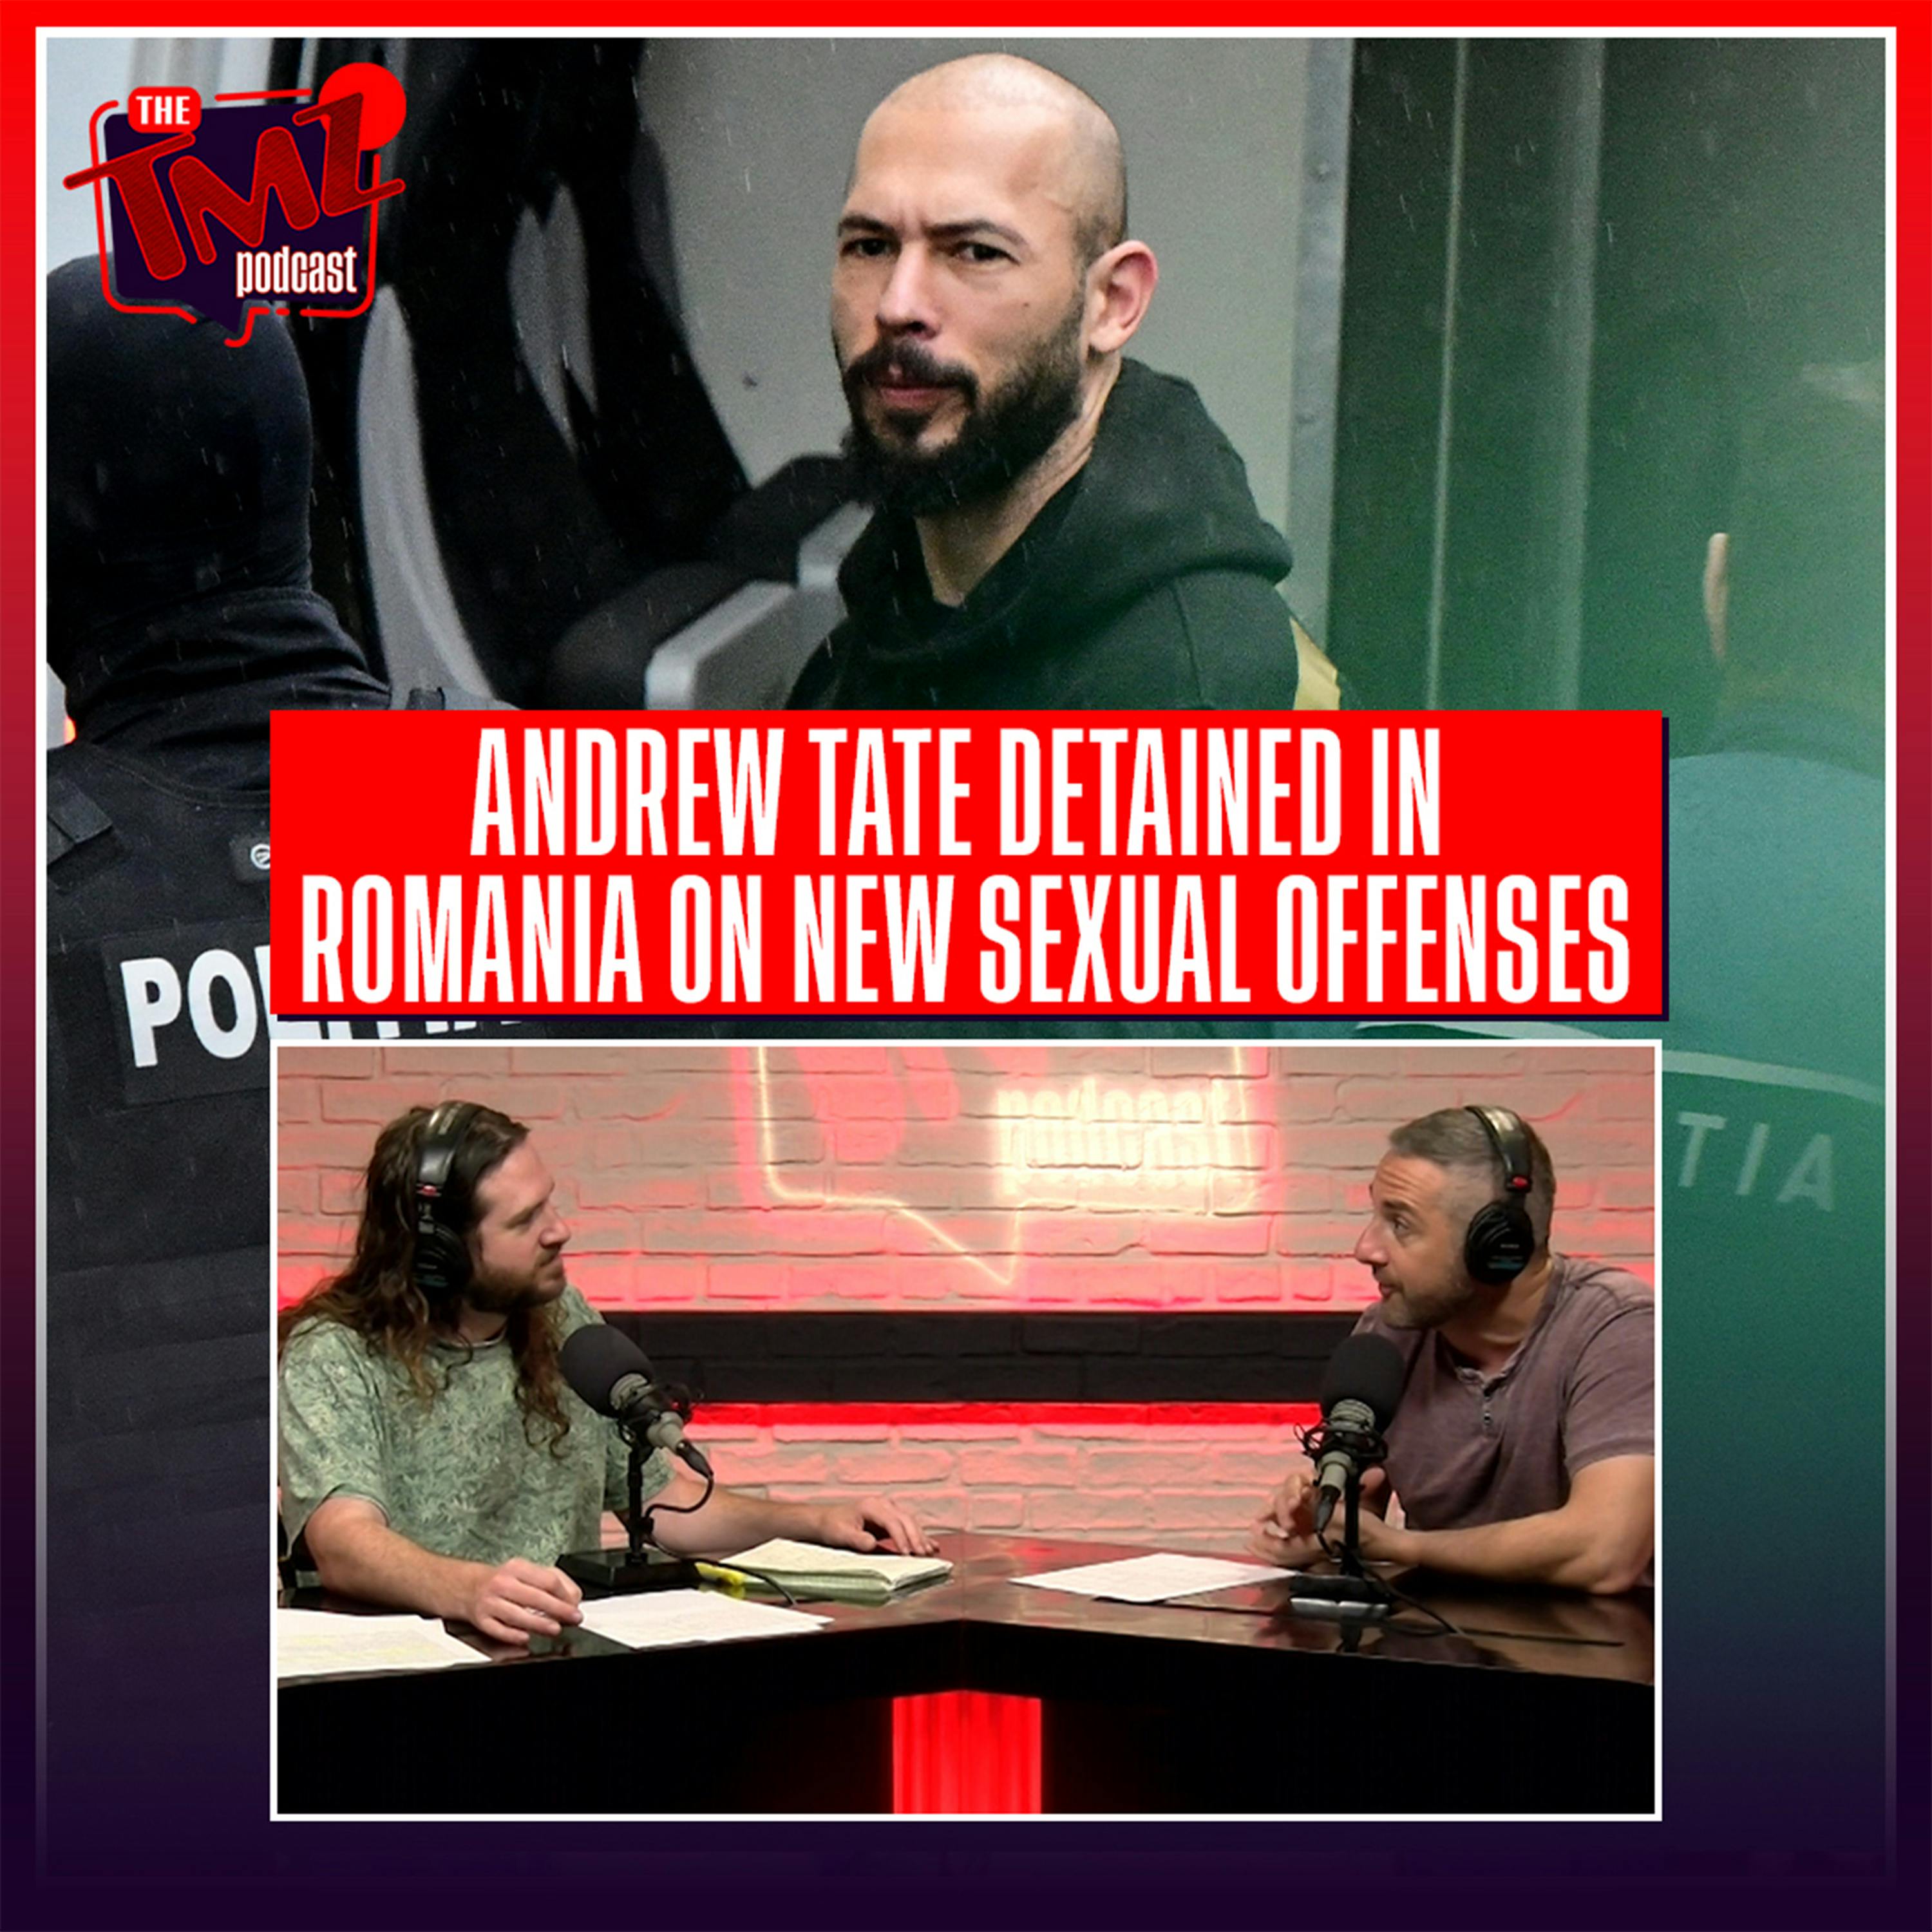 Andrew Tate Detained in Romania but He Says the Allegations Are B.S.